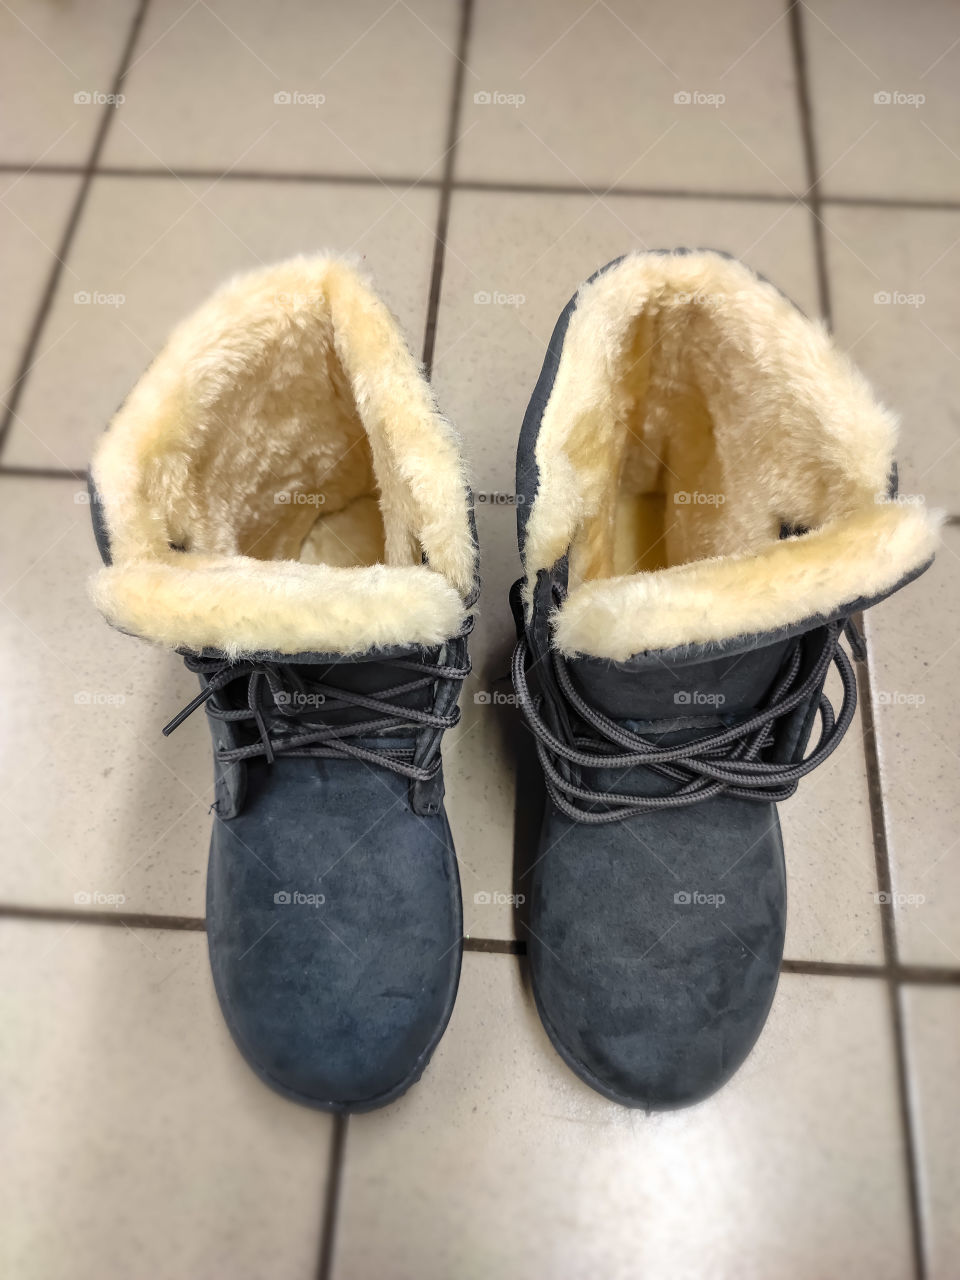 Winter boots with blurred background in the background